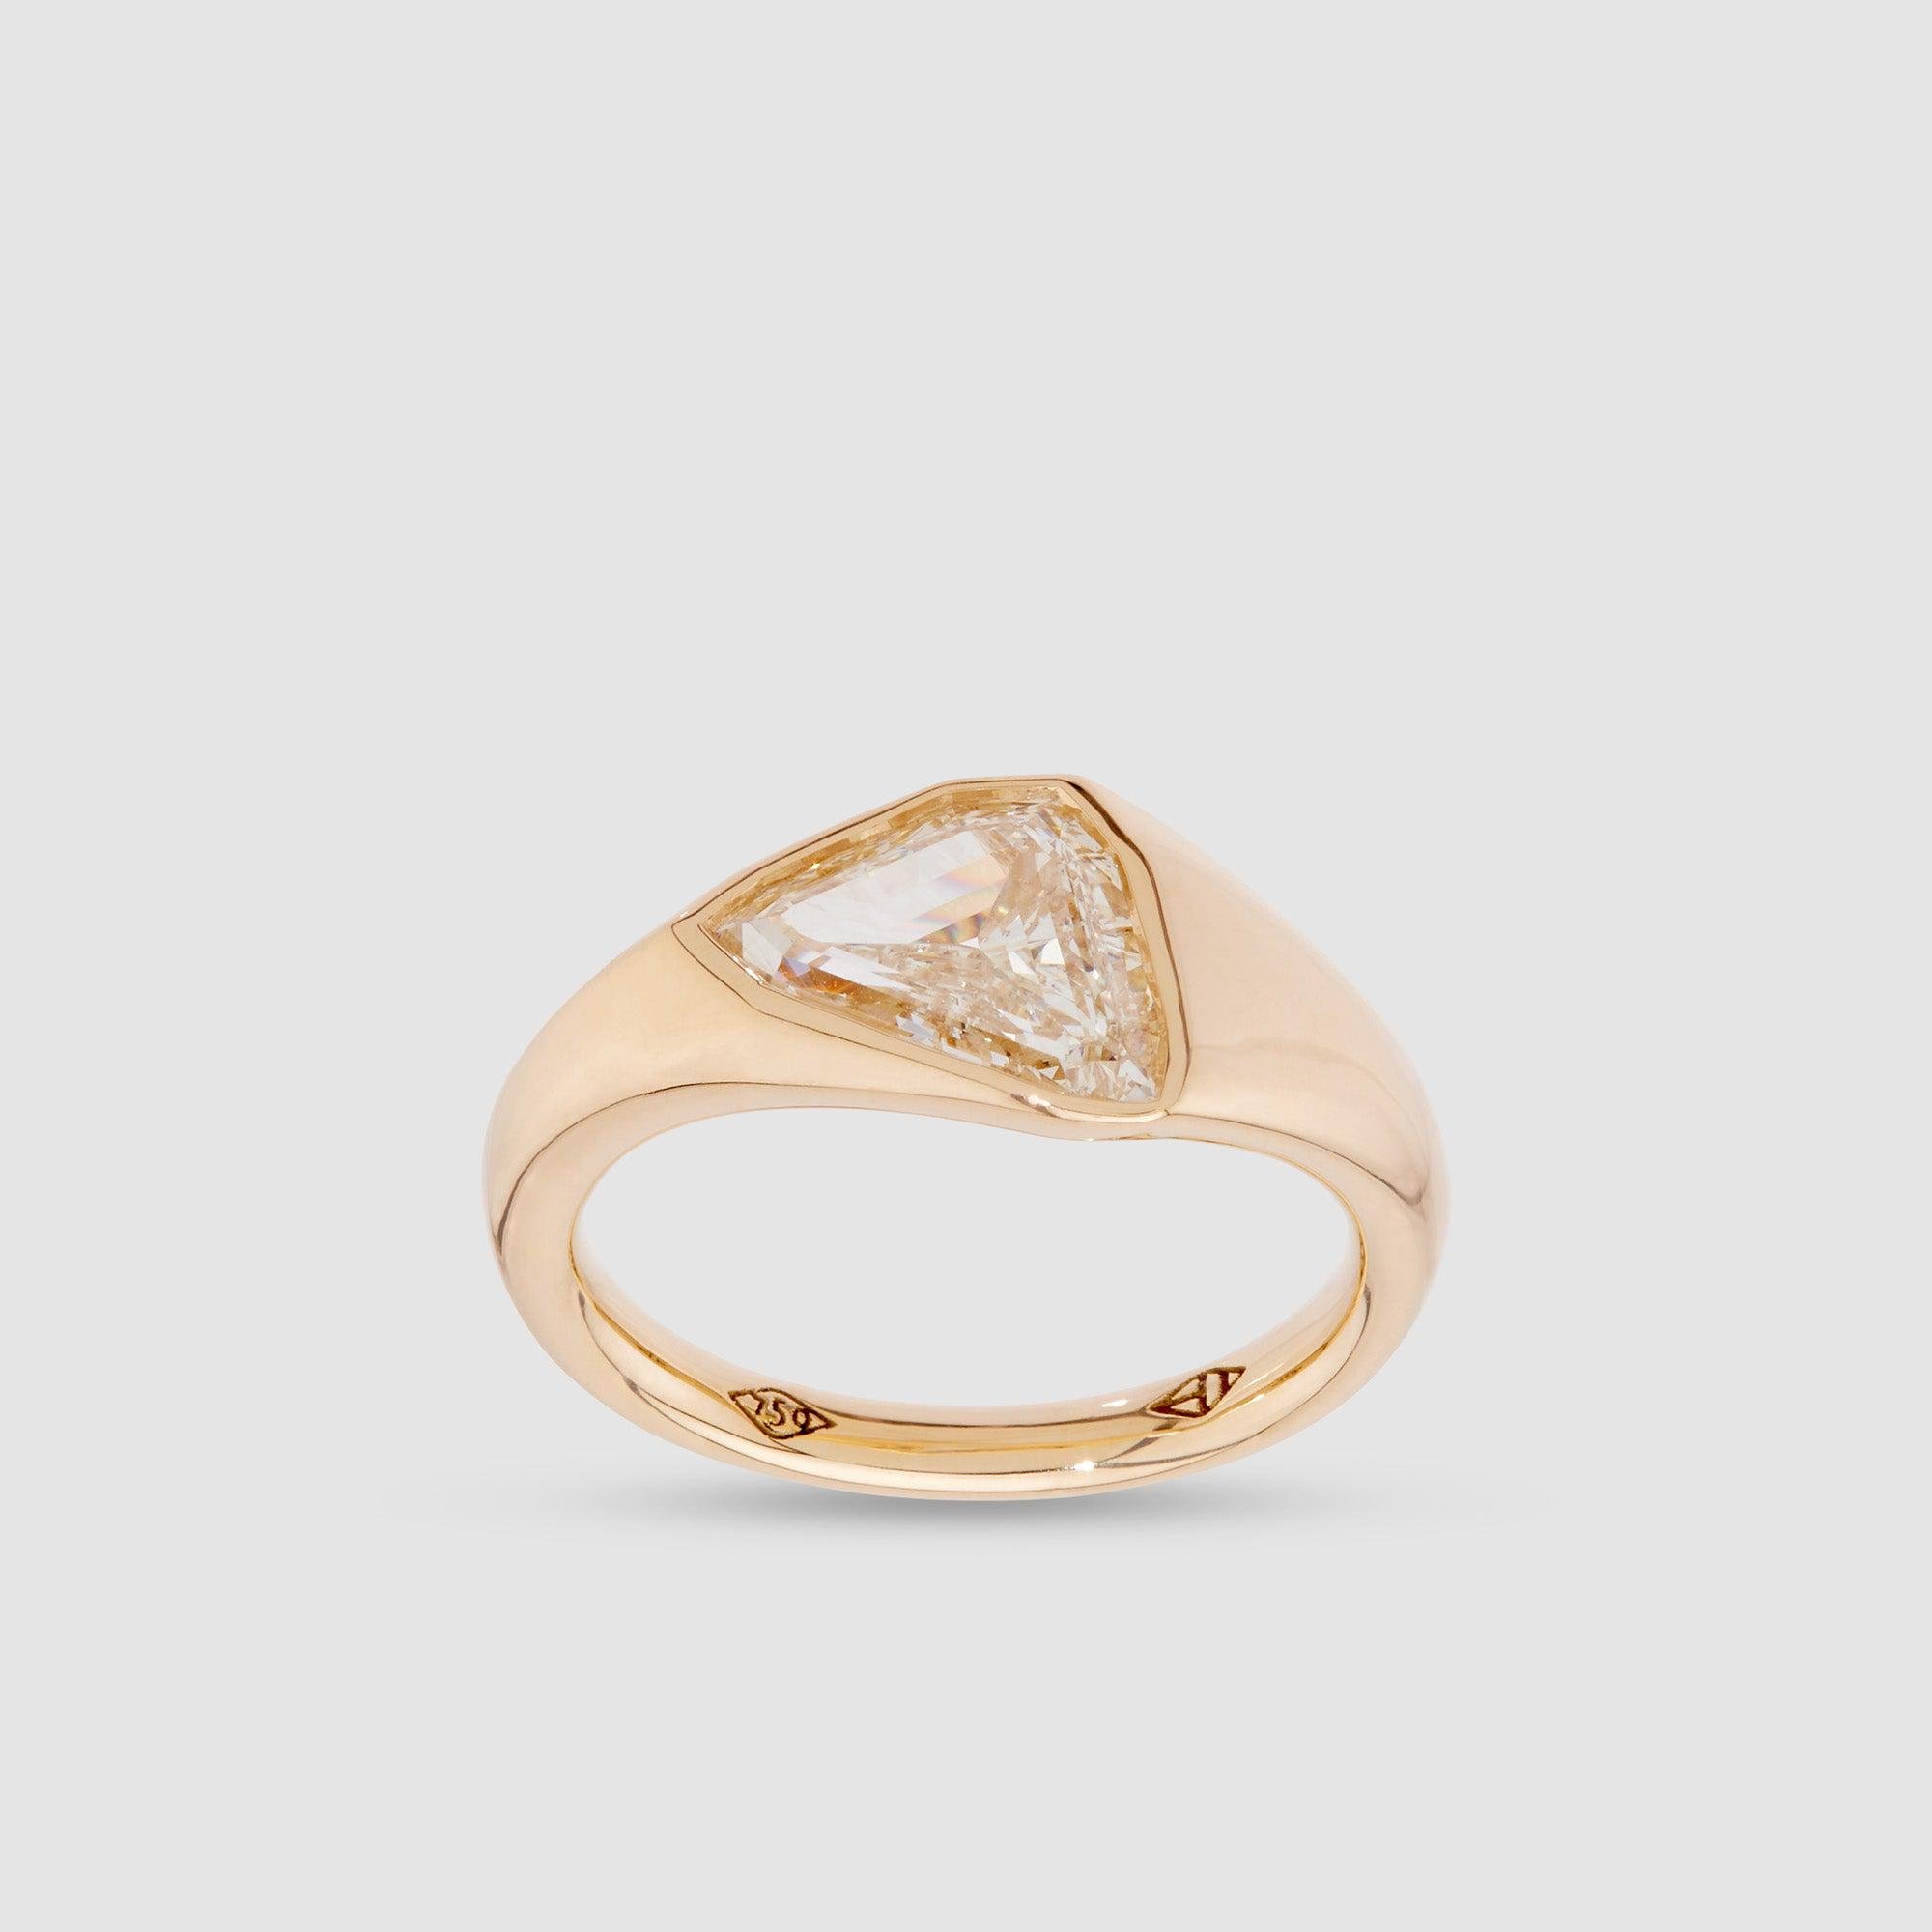 Artemer - One Of A Kind Yellow Gold Solitaire Ring by ARTEMER